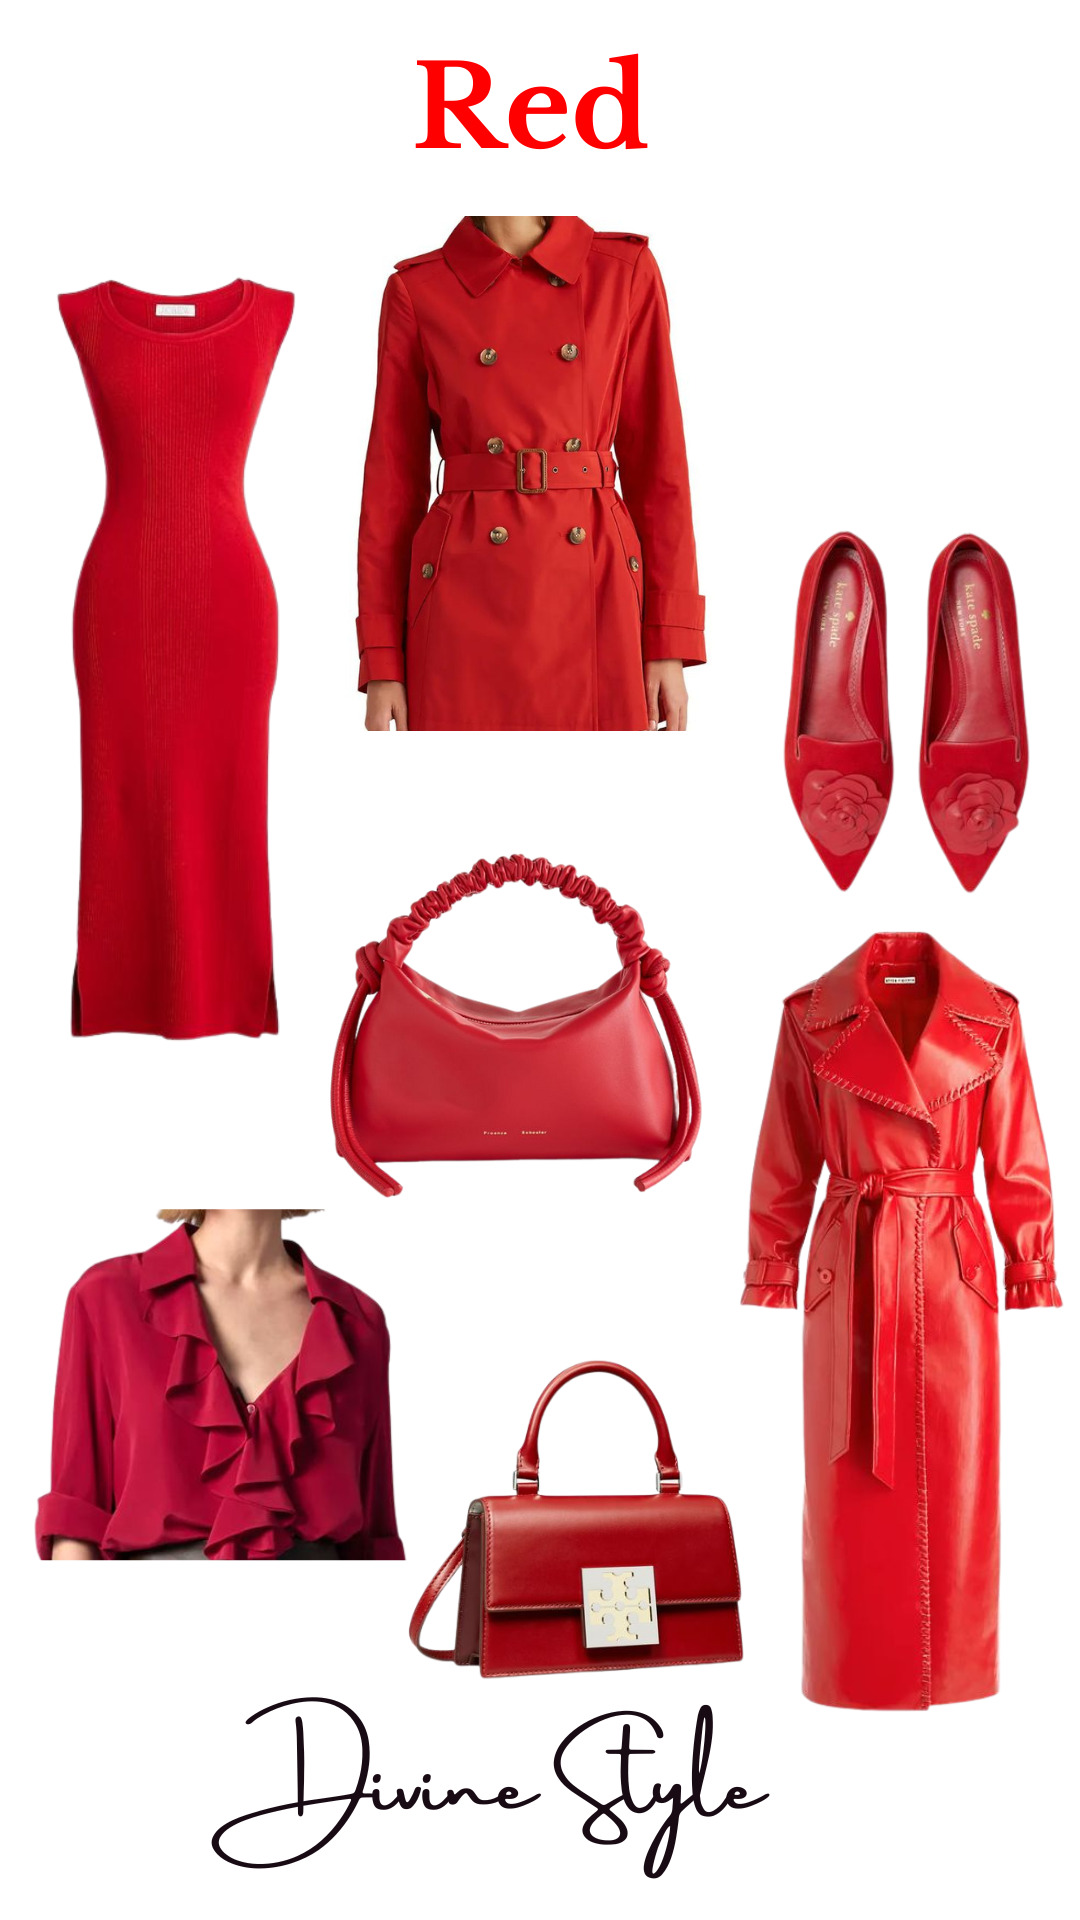 Fall Colors of the Season- Chocolate & Red, shop women's red clothing, shoes, accessories